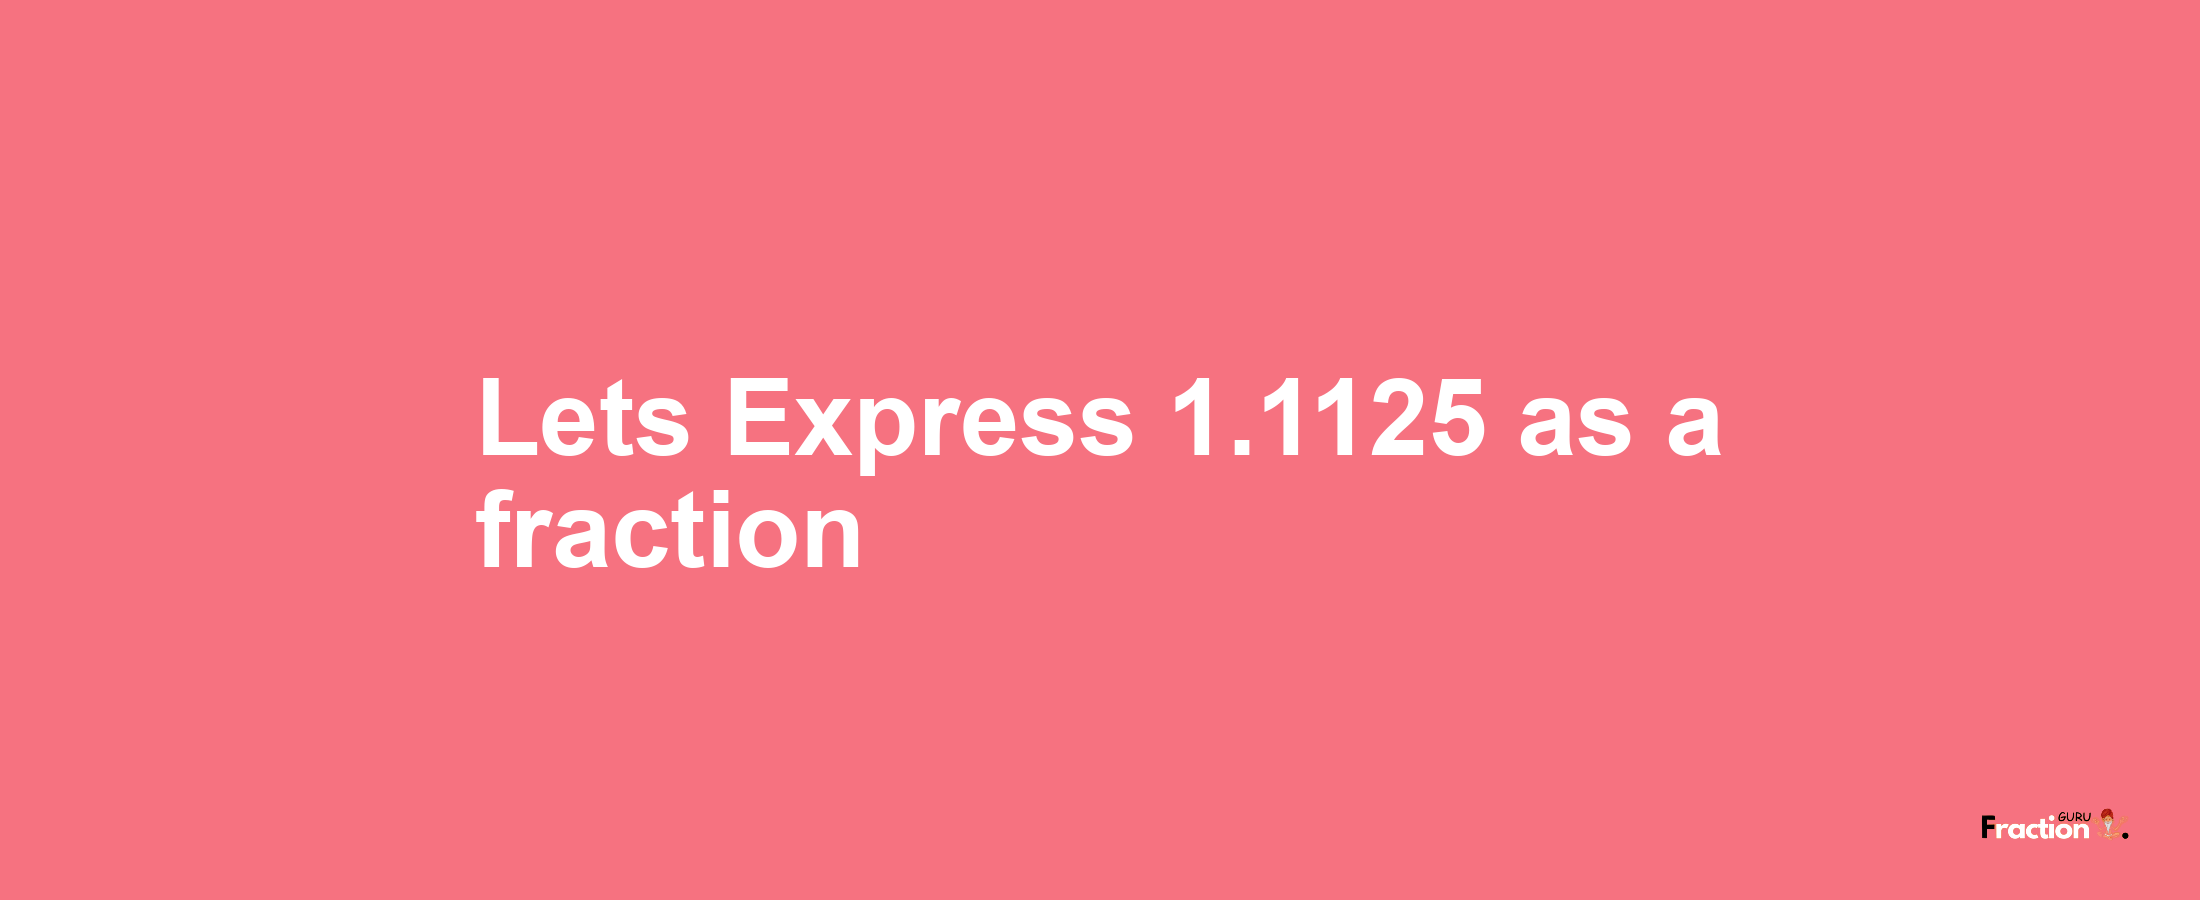 Lets Express 1.1125 as afraction